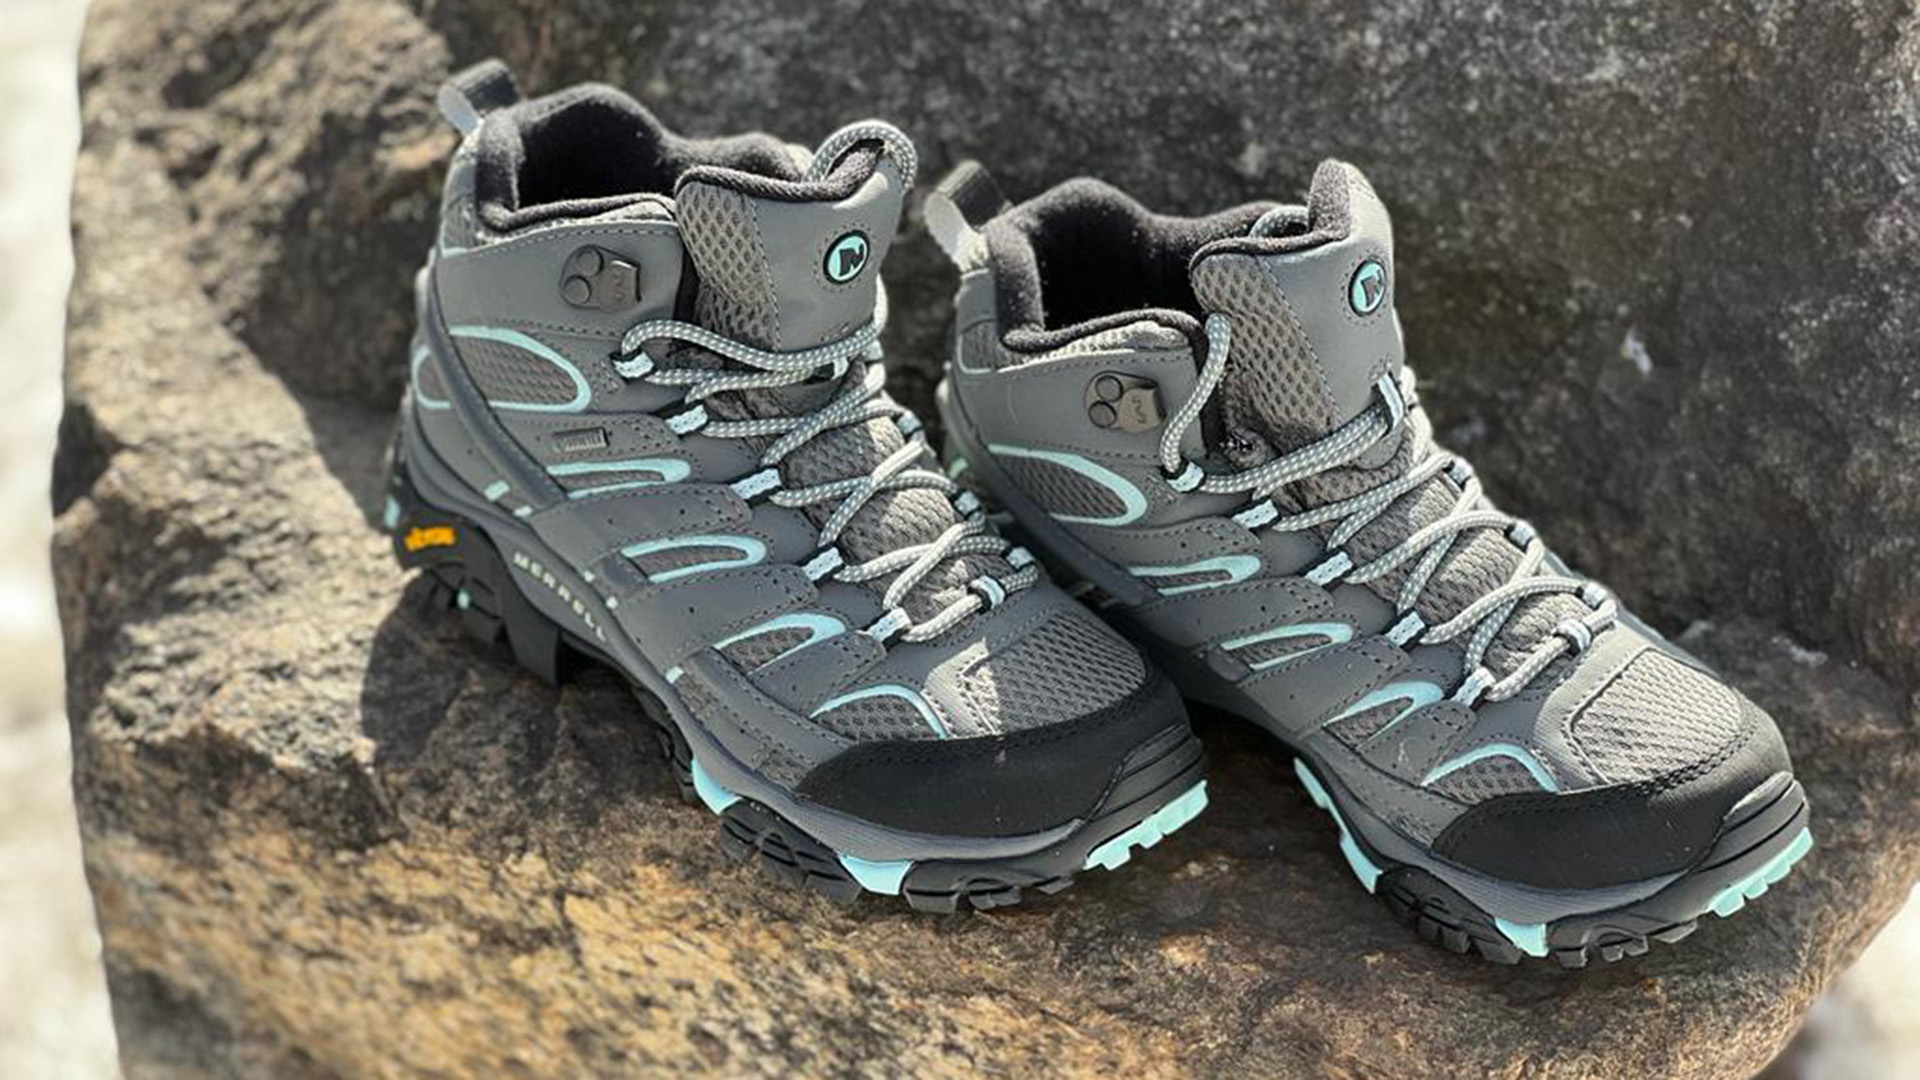 Merrell Women's Moab Mid review: reliable all-rounder and high-comfort hiking boot | T3